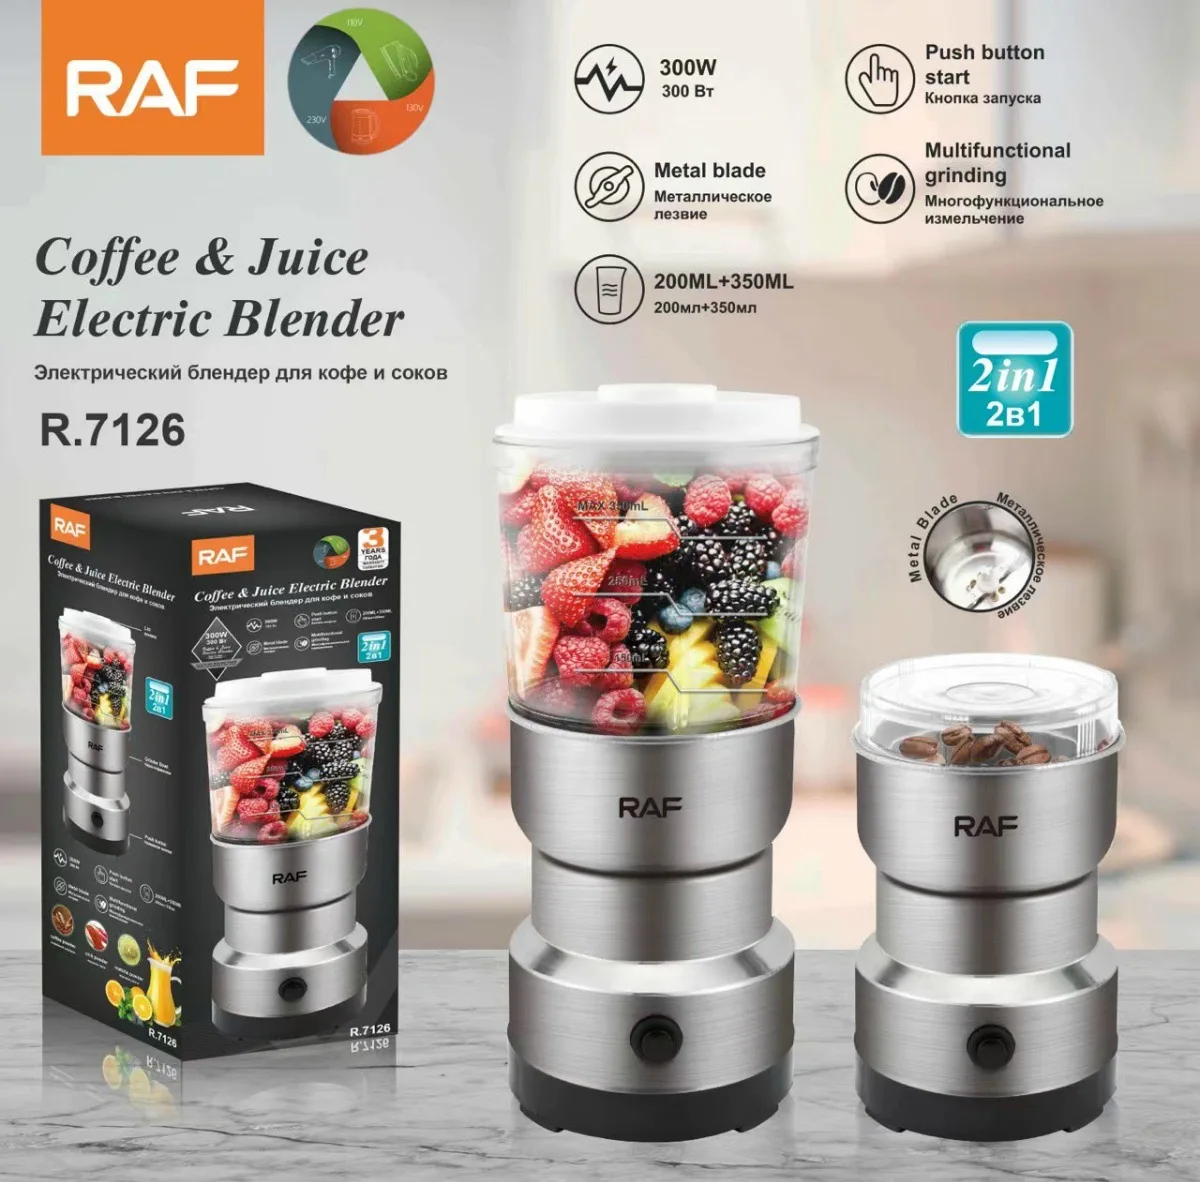 

Electric Coffee Grinder for home Nuts Beans Spices Blender Grains Grinder Machine Kitchen Multifunctional Coffe Bean Grinding